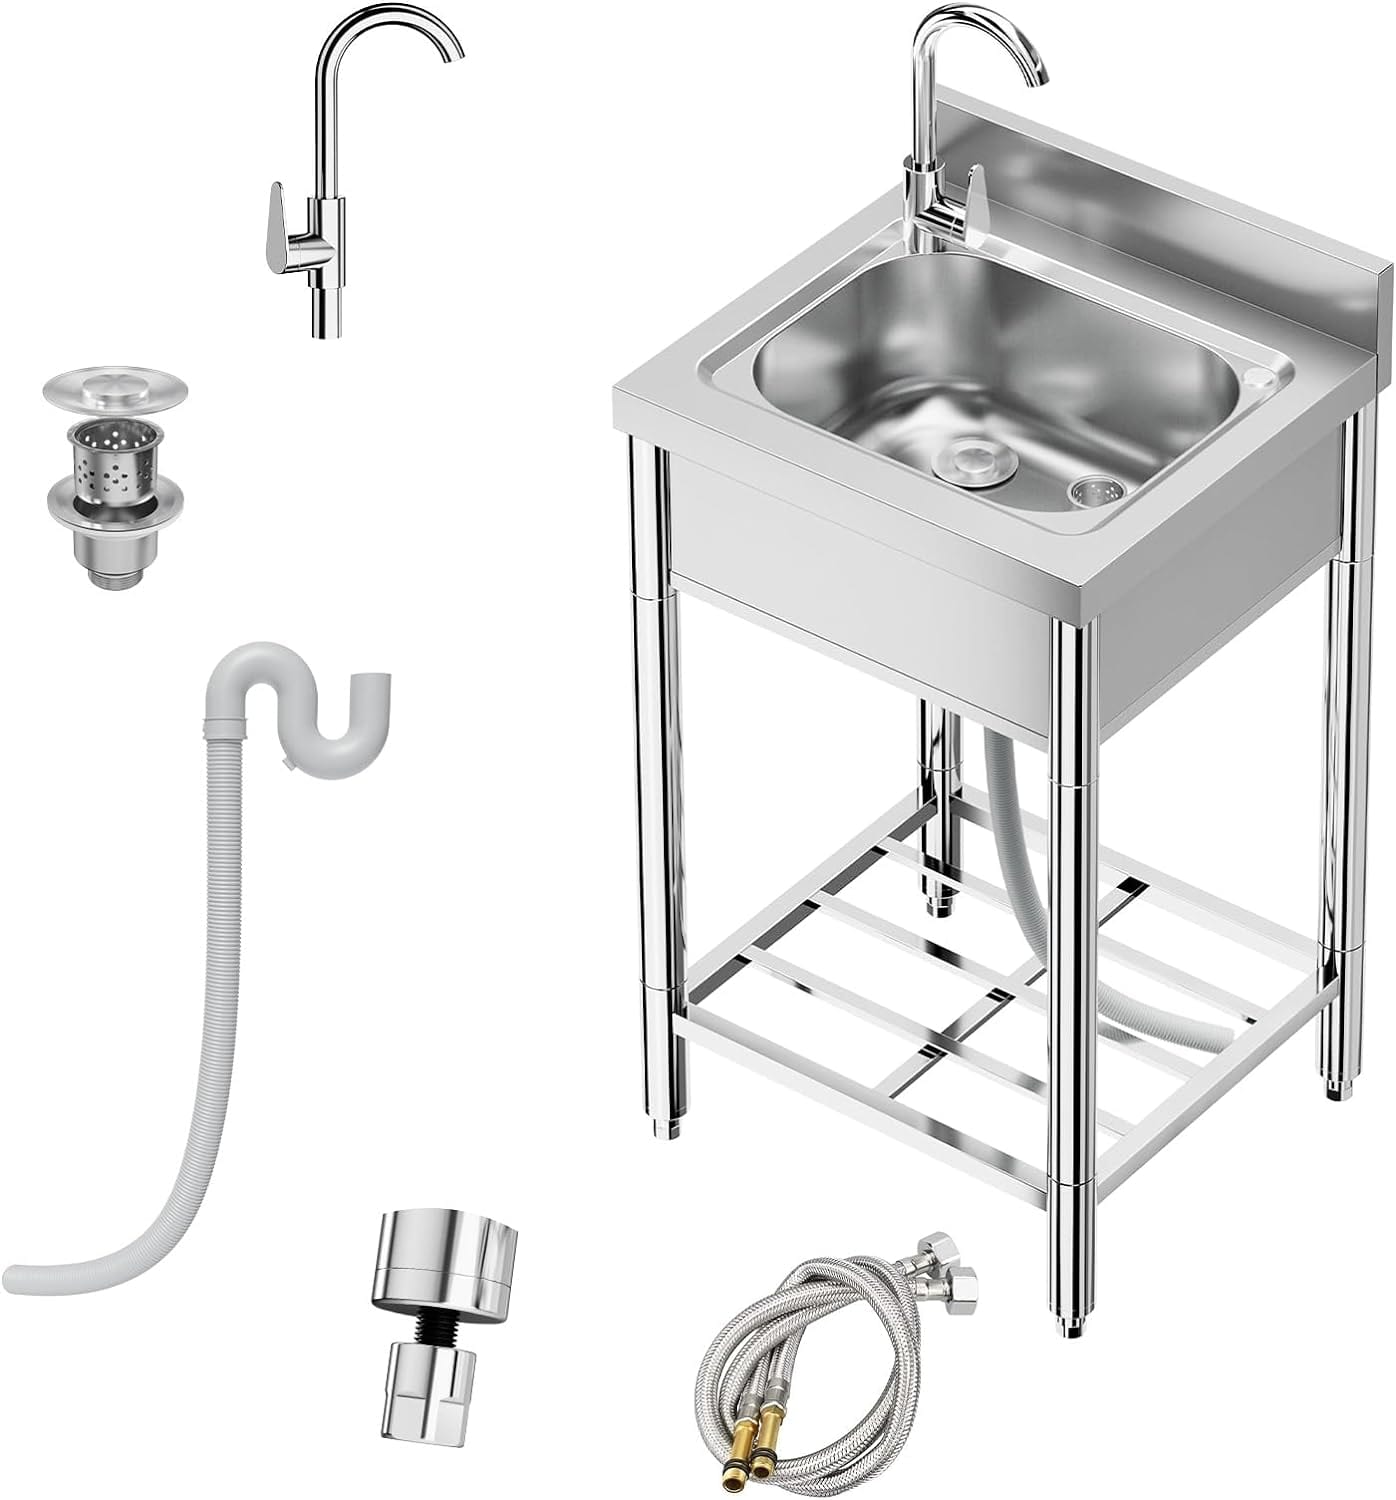 Utility Stainless Steel Kitchen Single Sink Set with Hot and Cold Water Pipes, Workbench & Storage Rack for Restaurants, Kitchens, Garages, Laundry Rooms, Farms, Outdoor